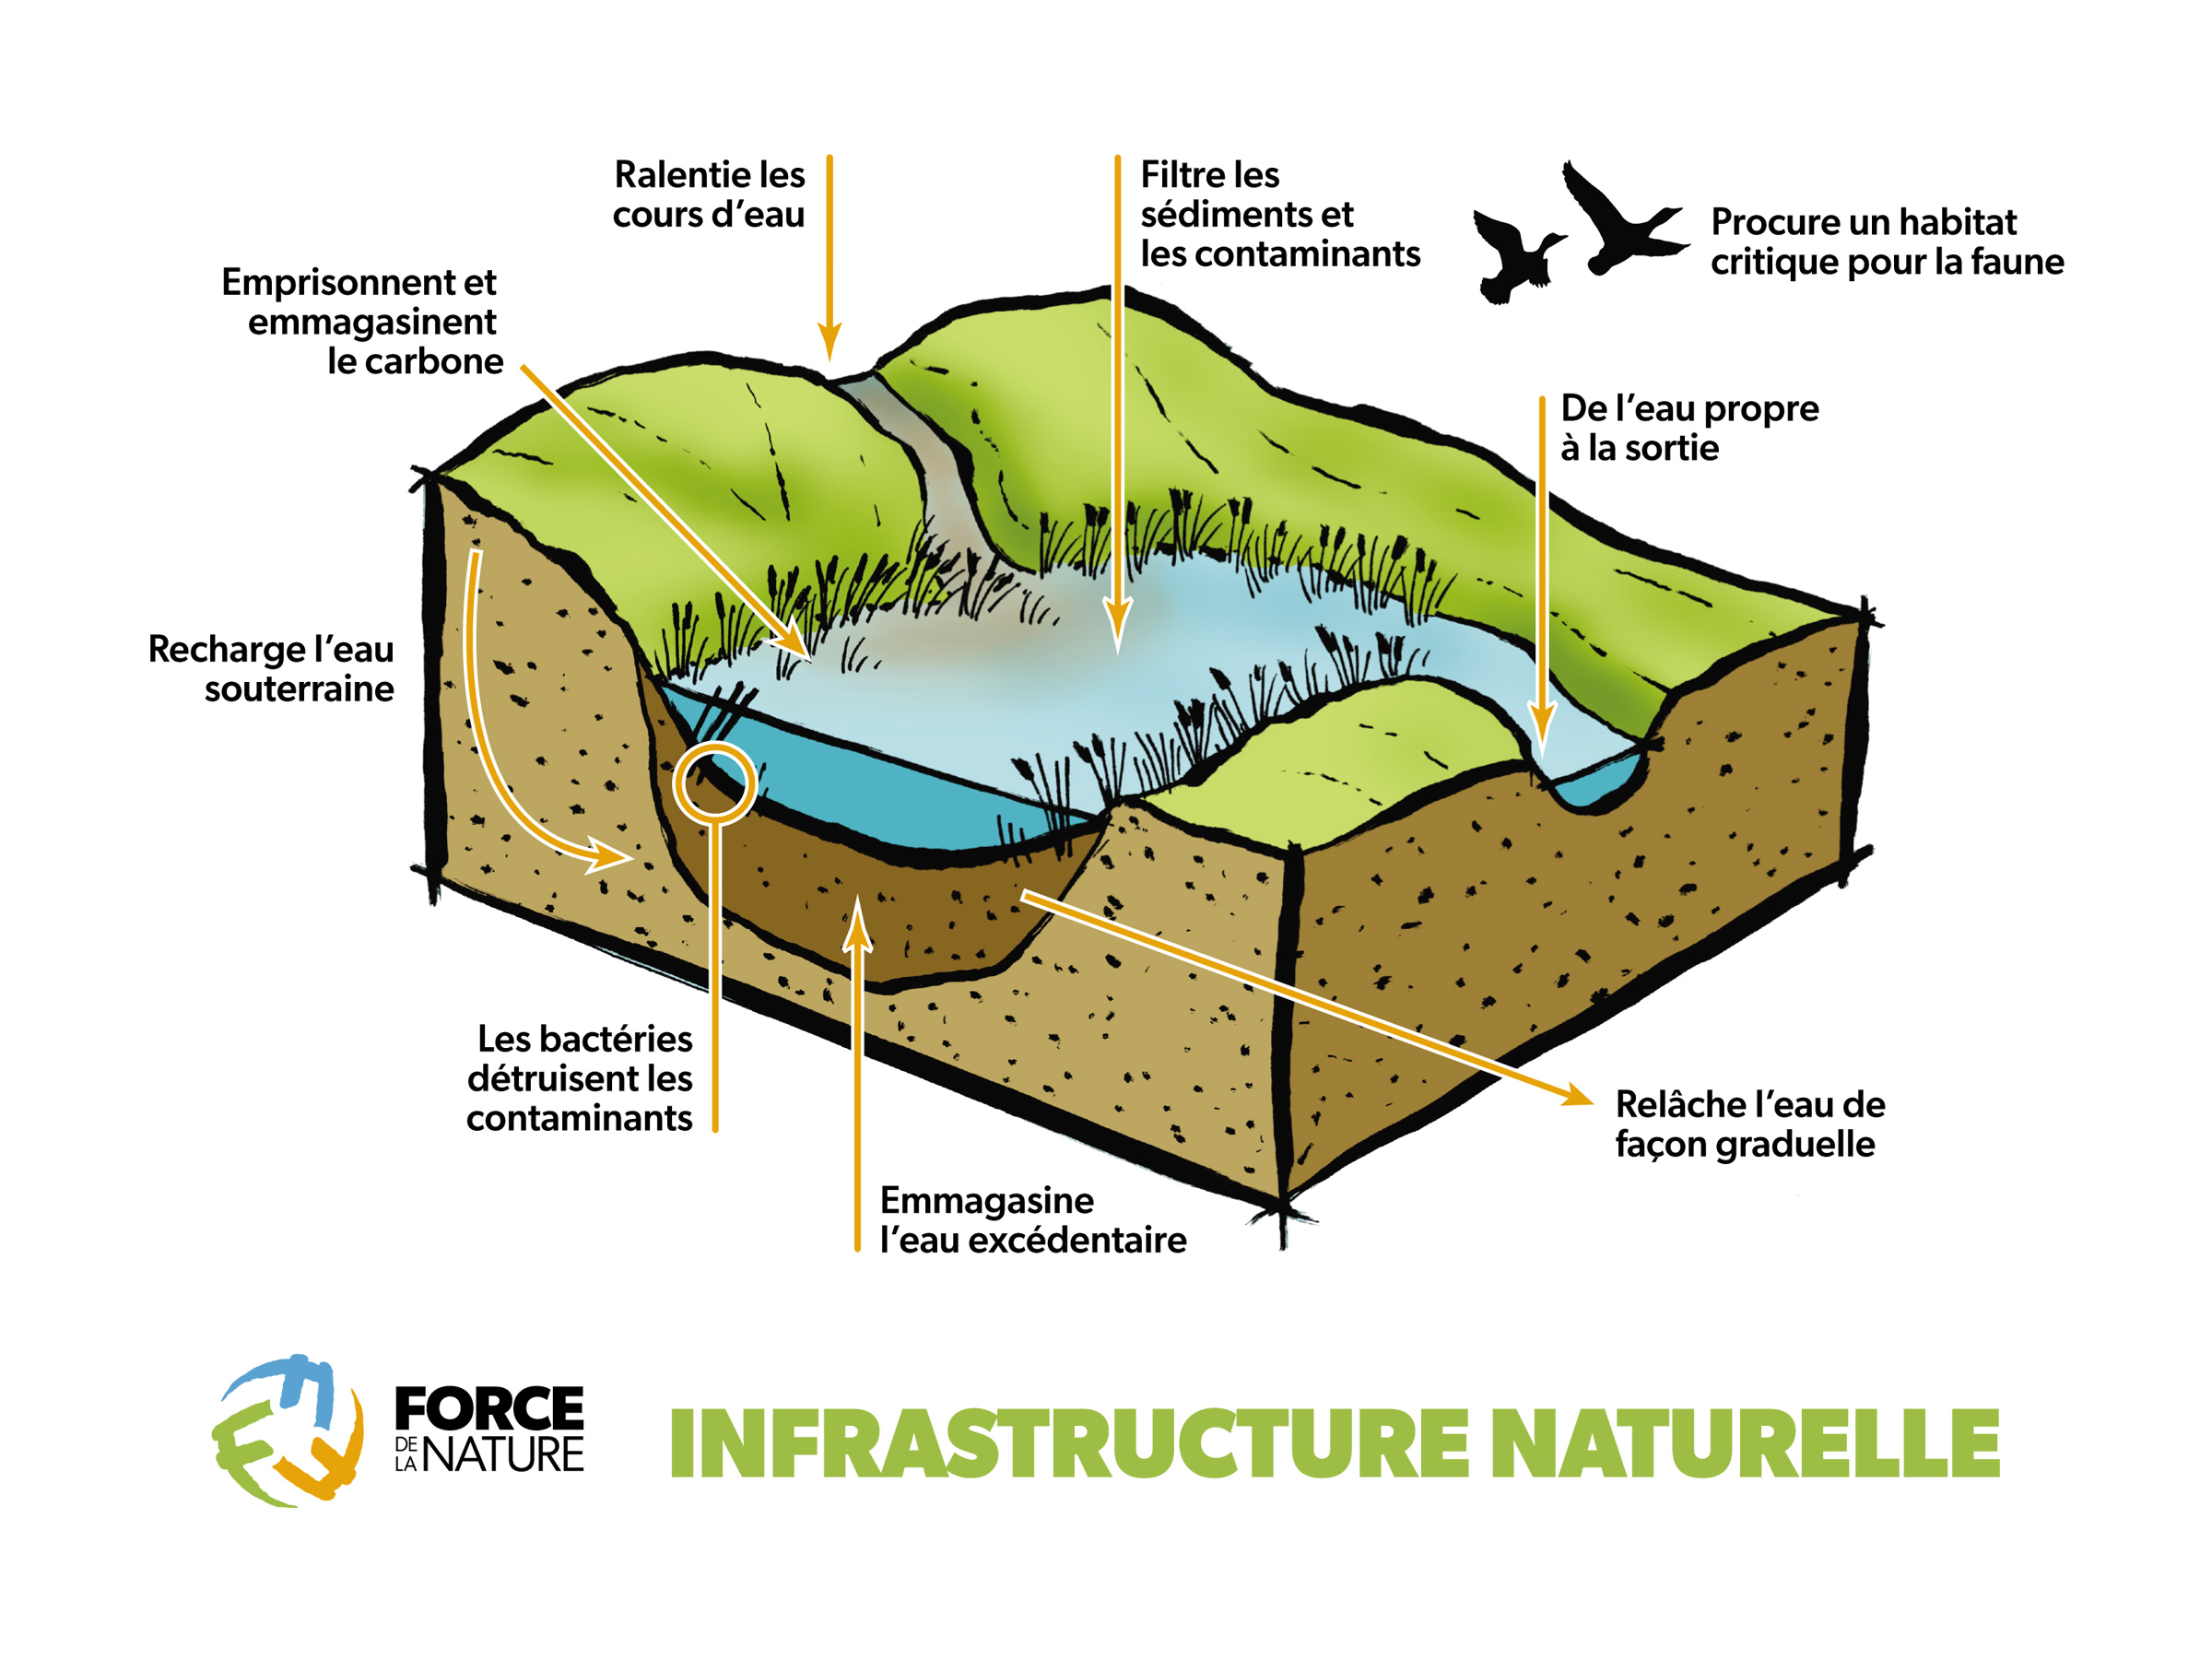 Natural Infrastructure